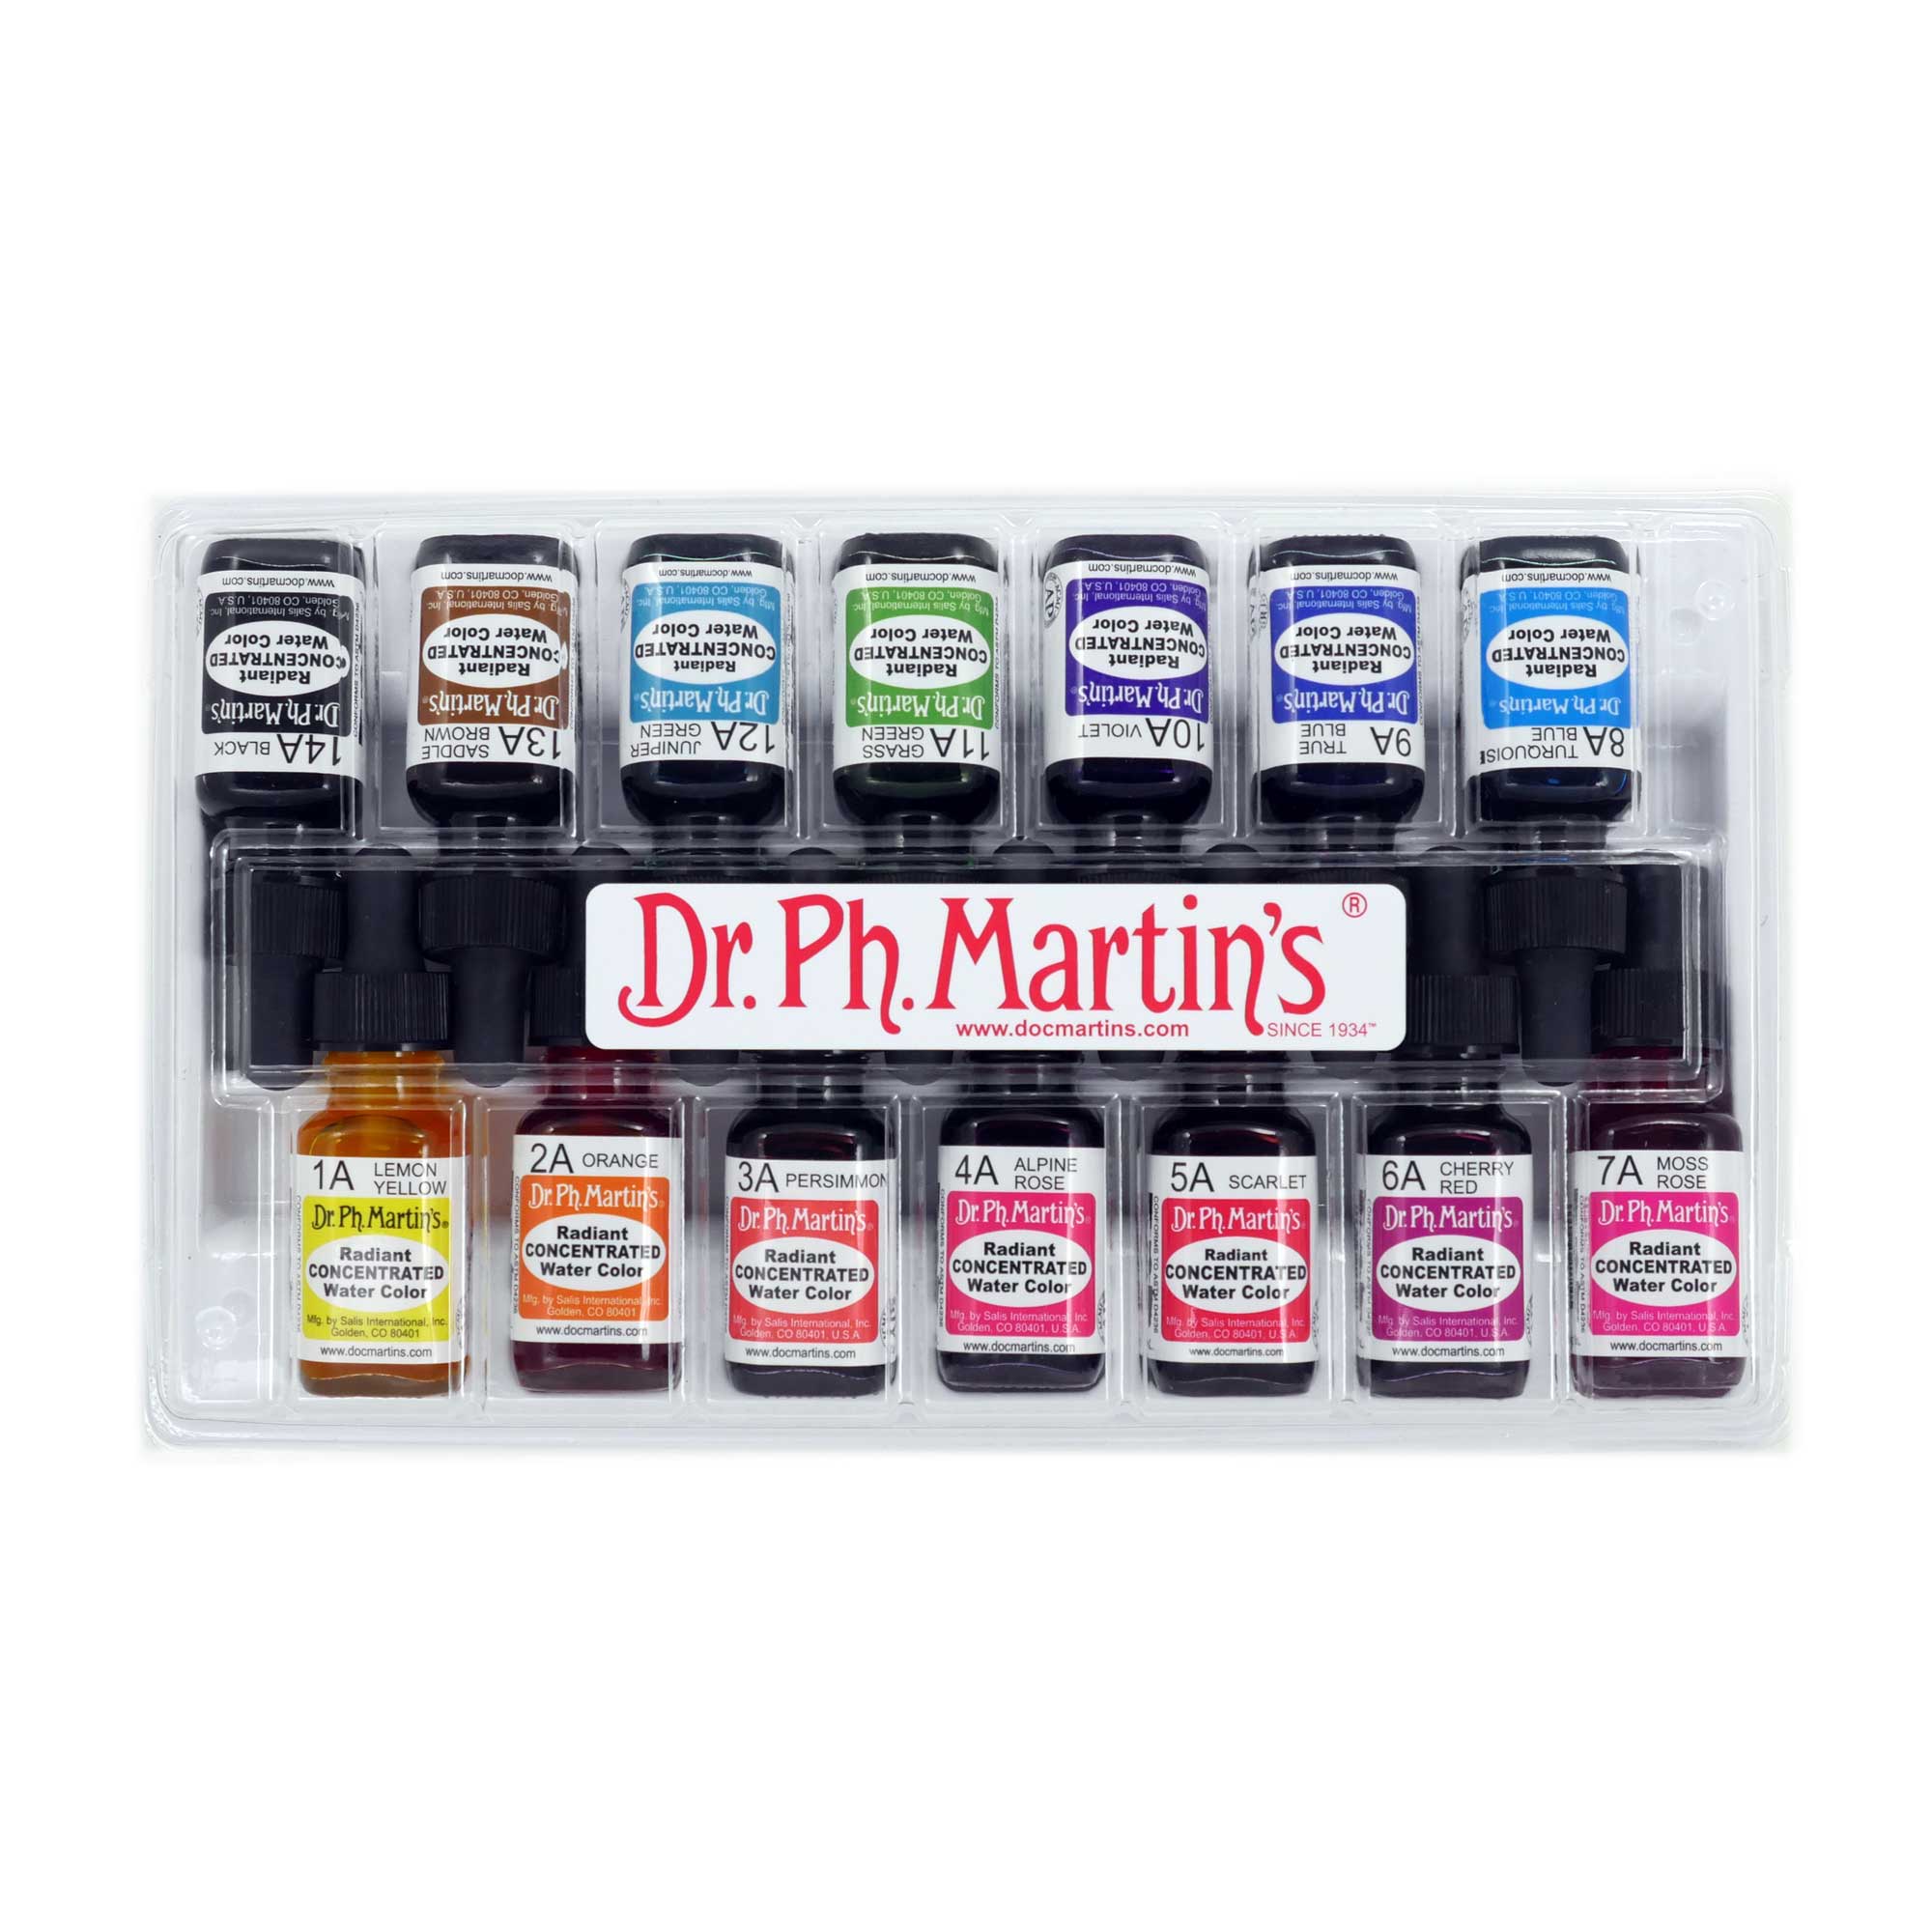 Dr. Ph. Martin's Radiant Concentrated Watercolour Ink - Set A